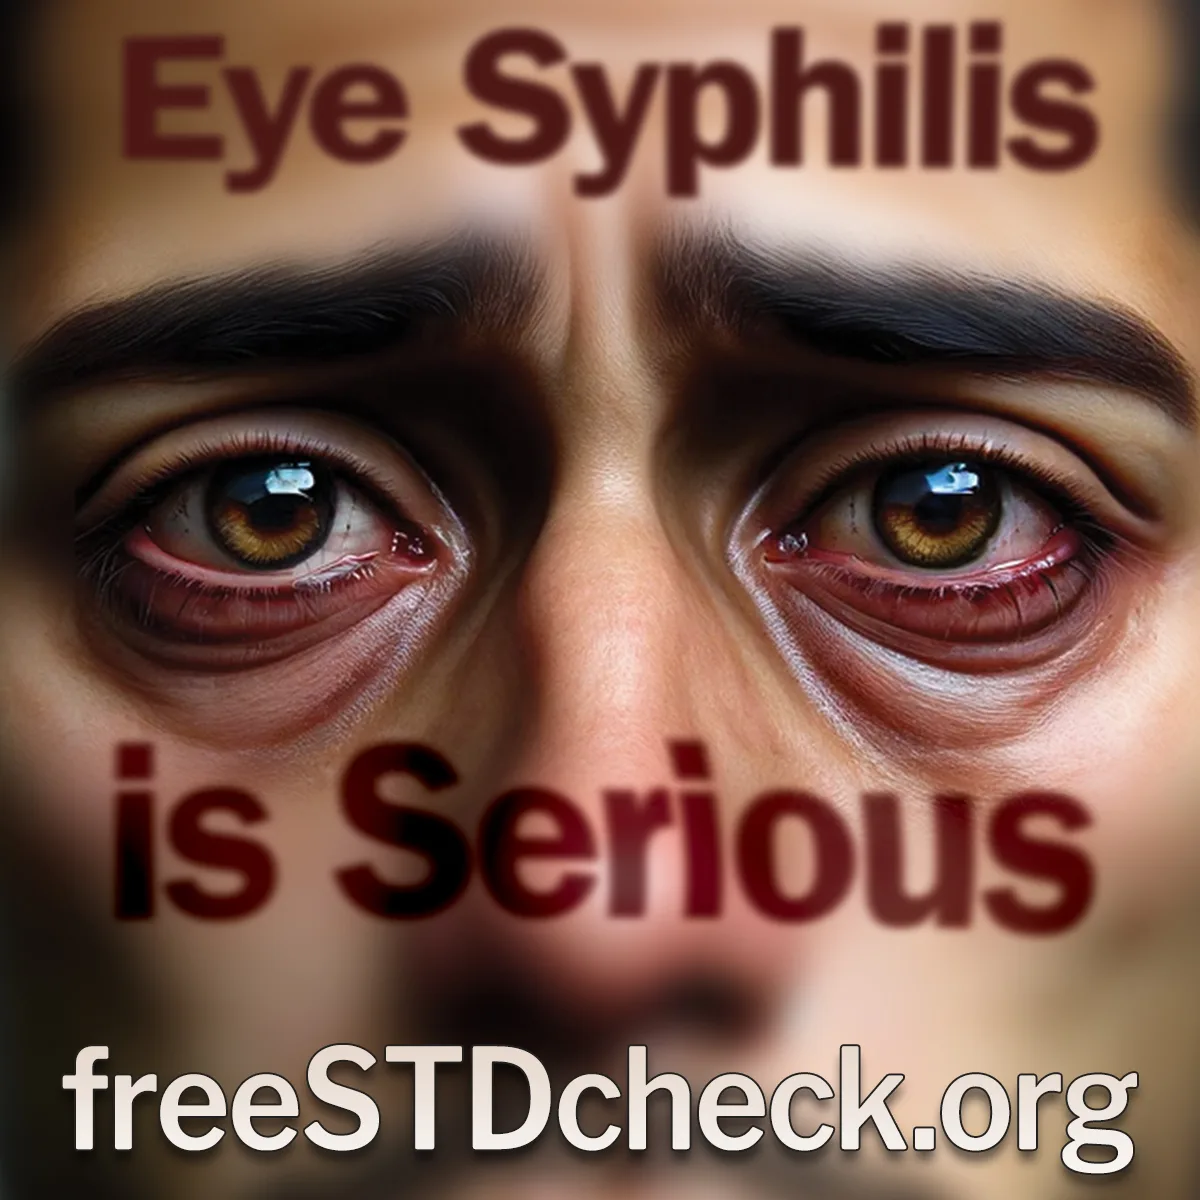 Symptoms of eye syphilis with the text "Eye Syphilis is Serious freeSTDcheck.org"